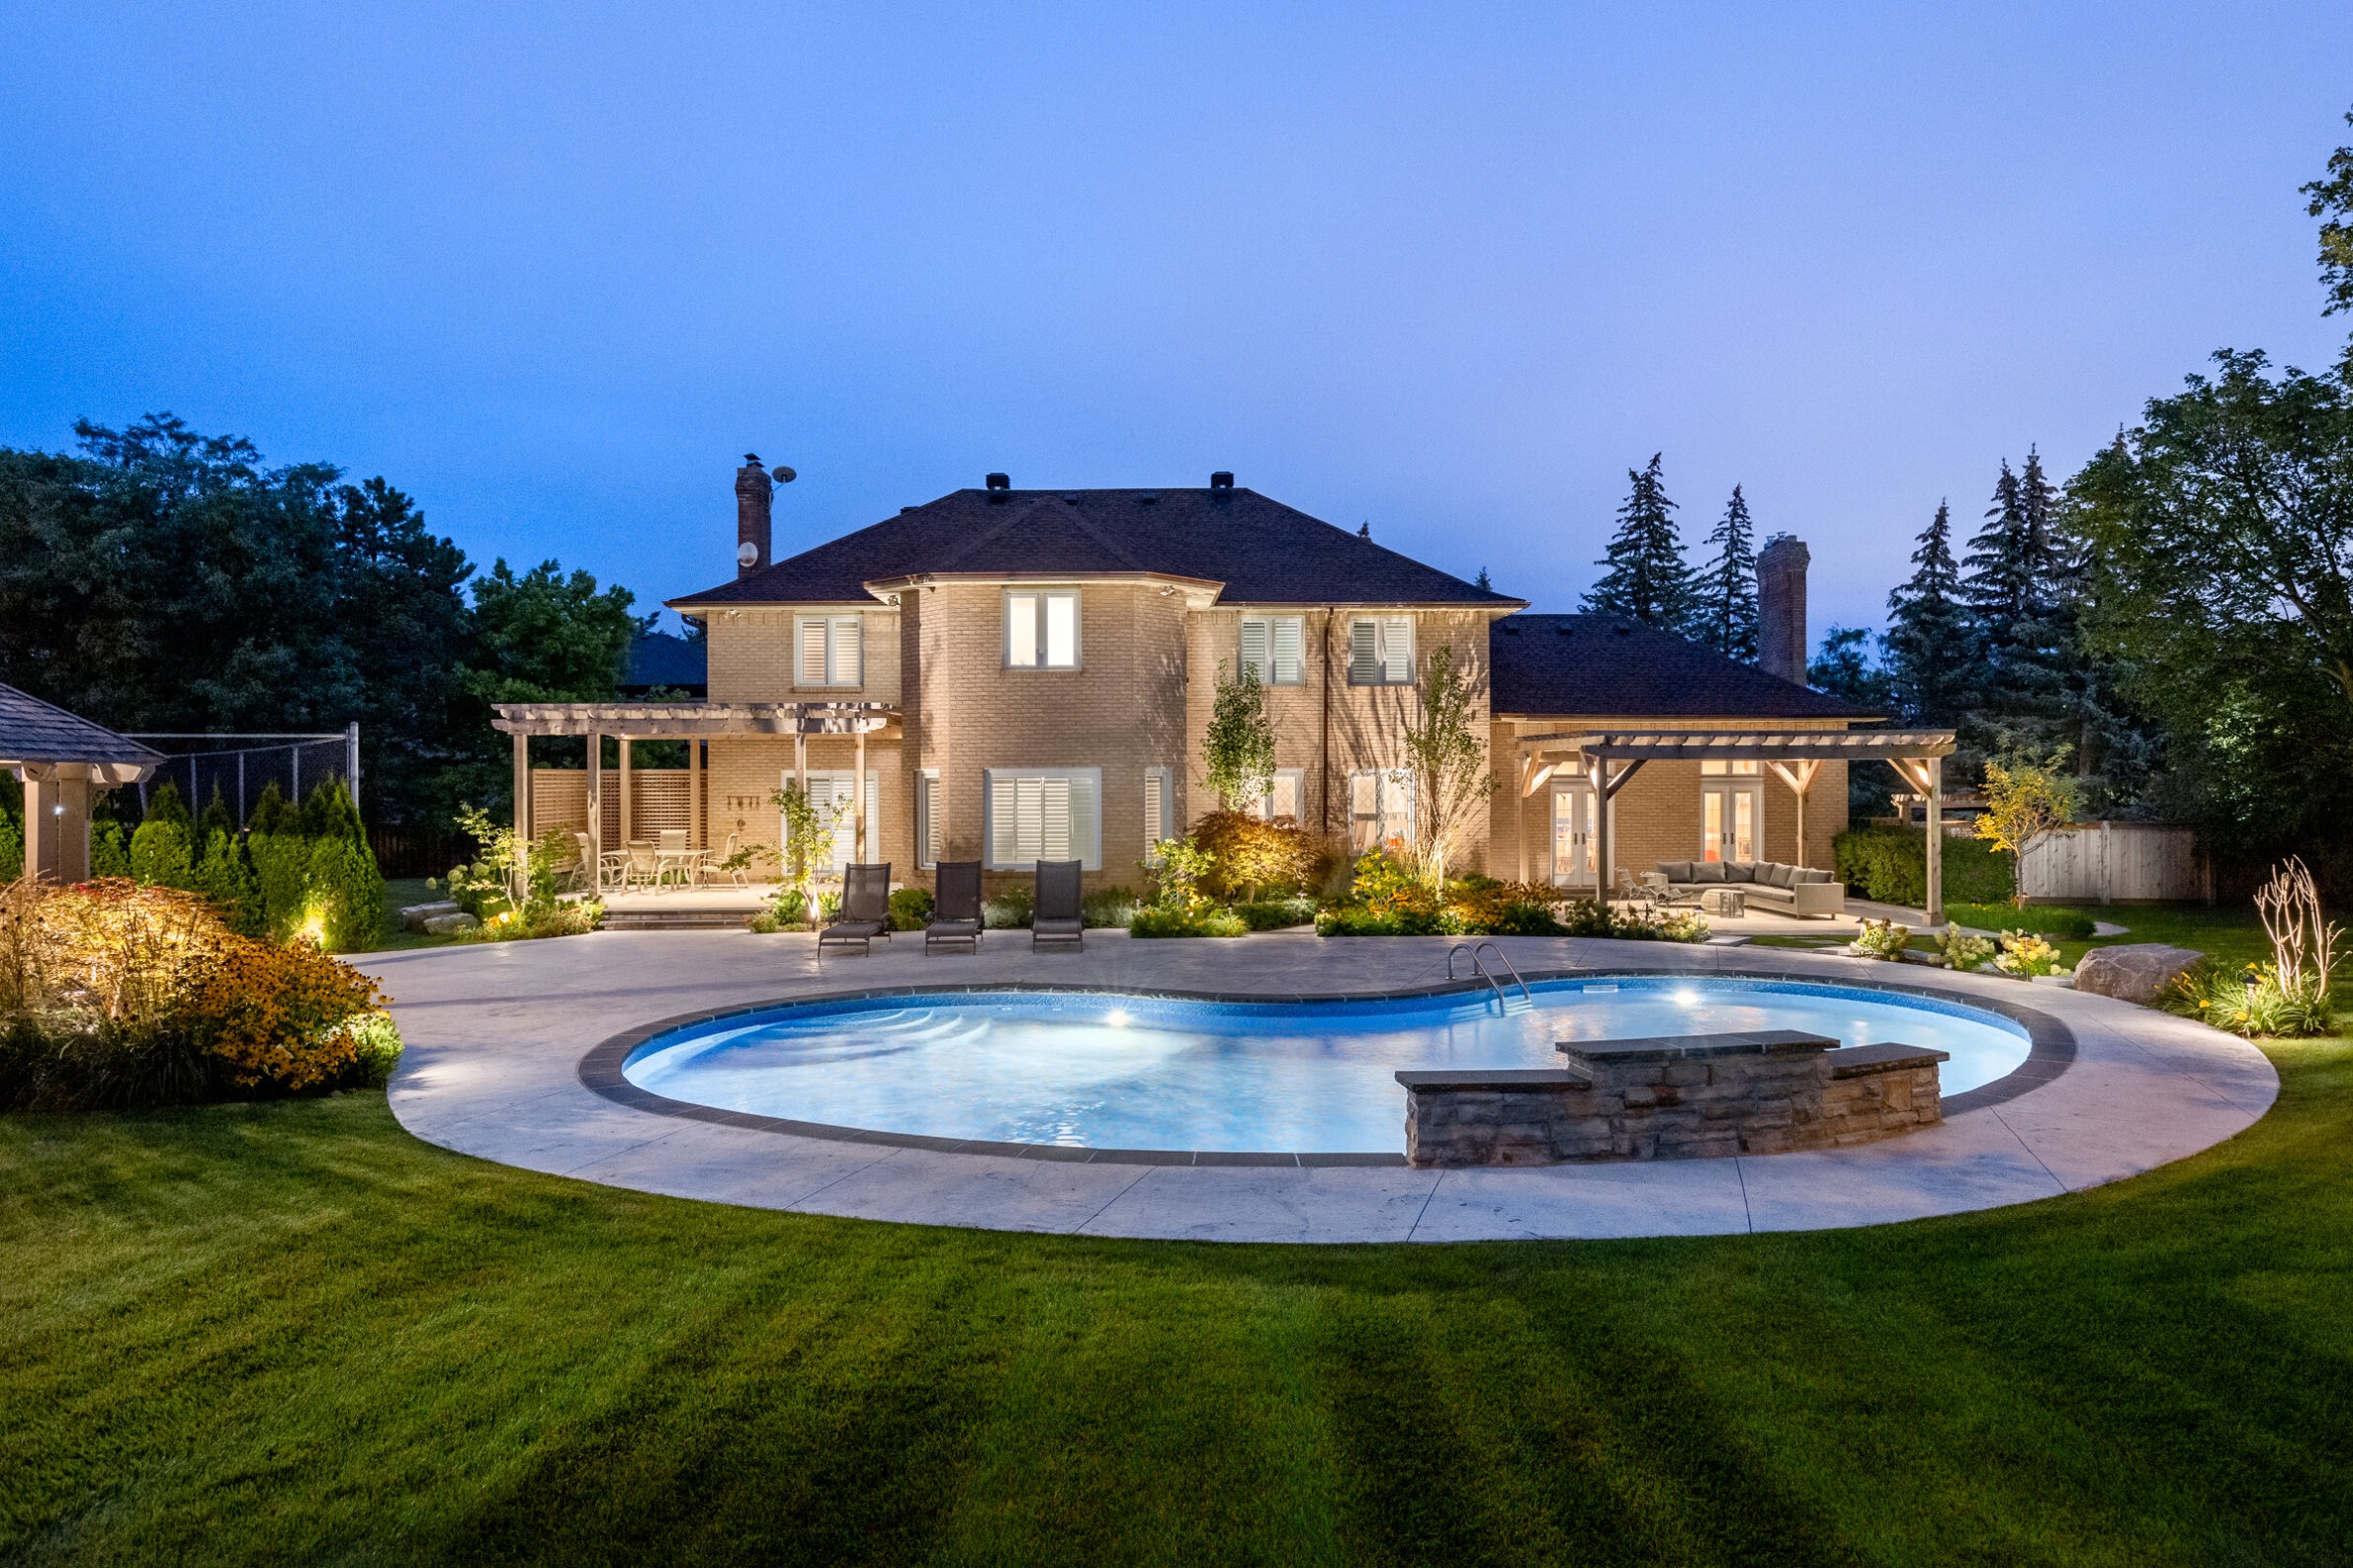 A luxurious two-story brick house at twilight with a lit swimming pool, landscaped garden, outdoor seating, and ambient lighting, set against a blue evening sky.